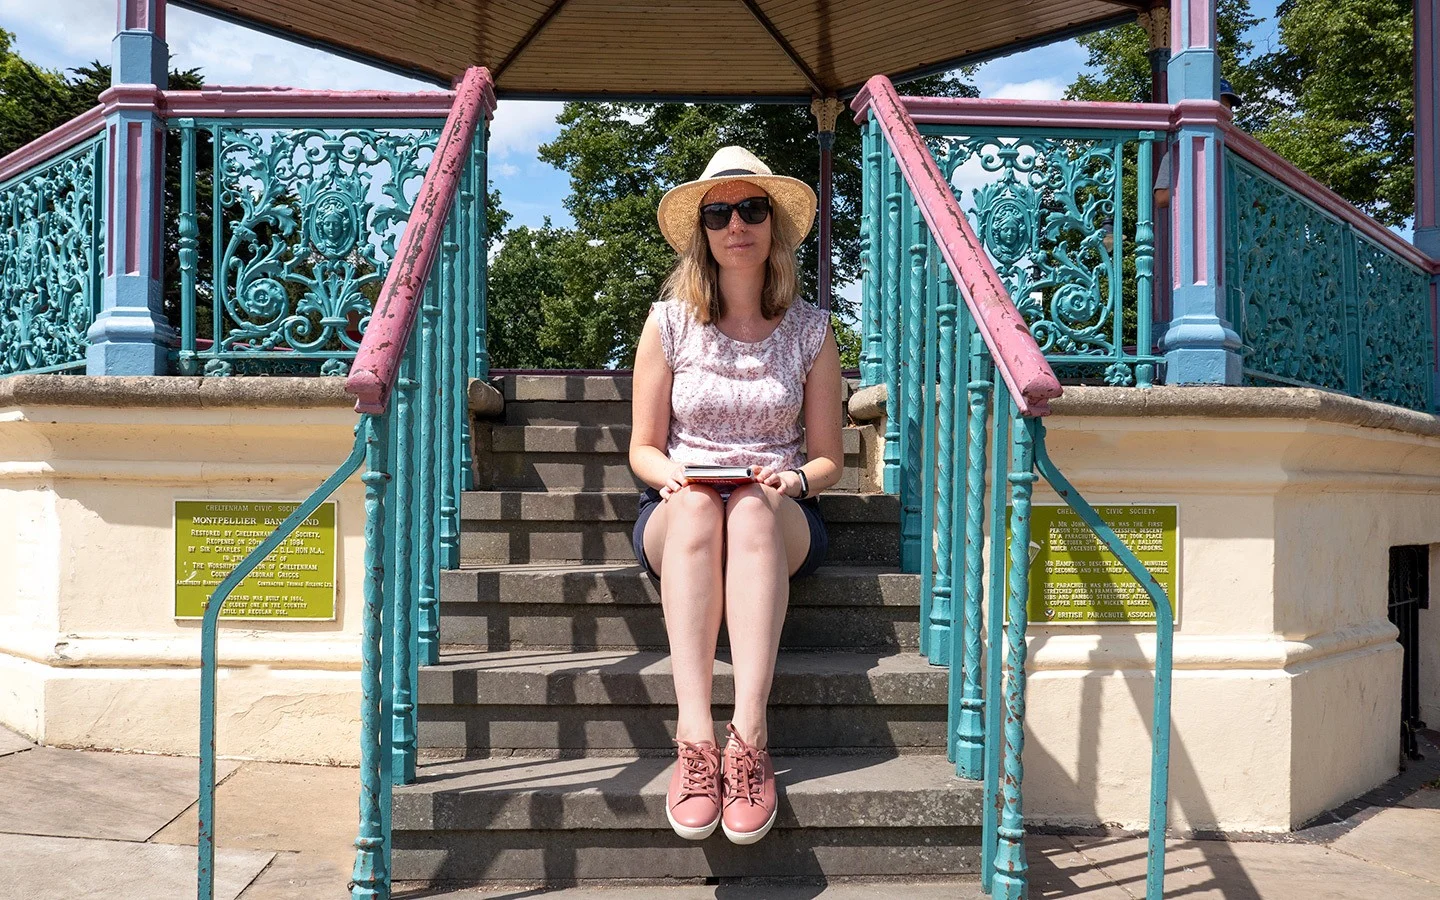 On the bandstand in Cheltenham